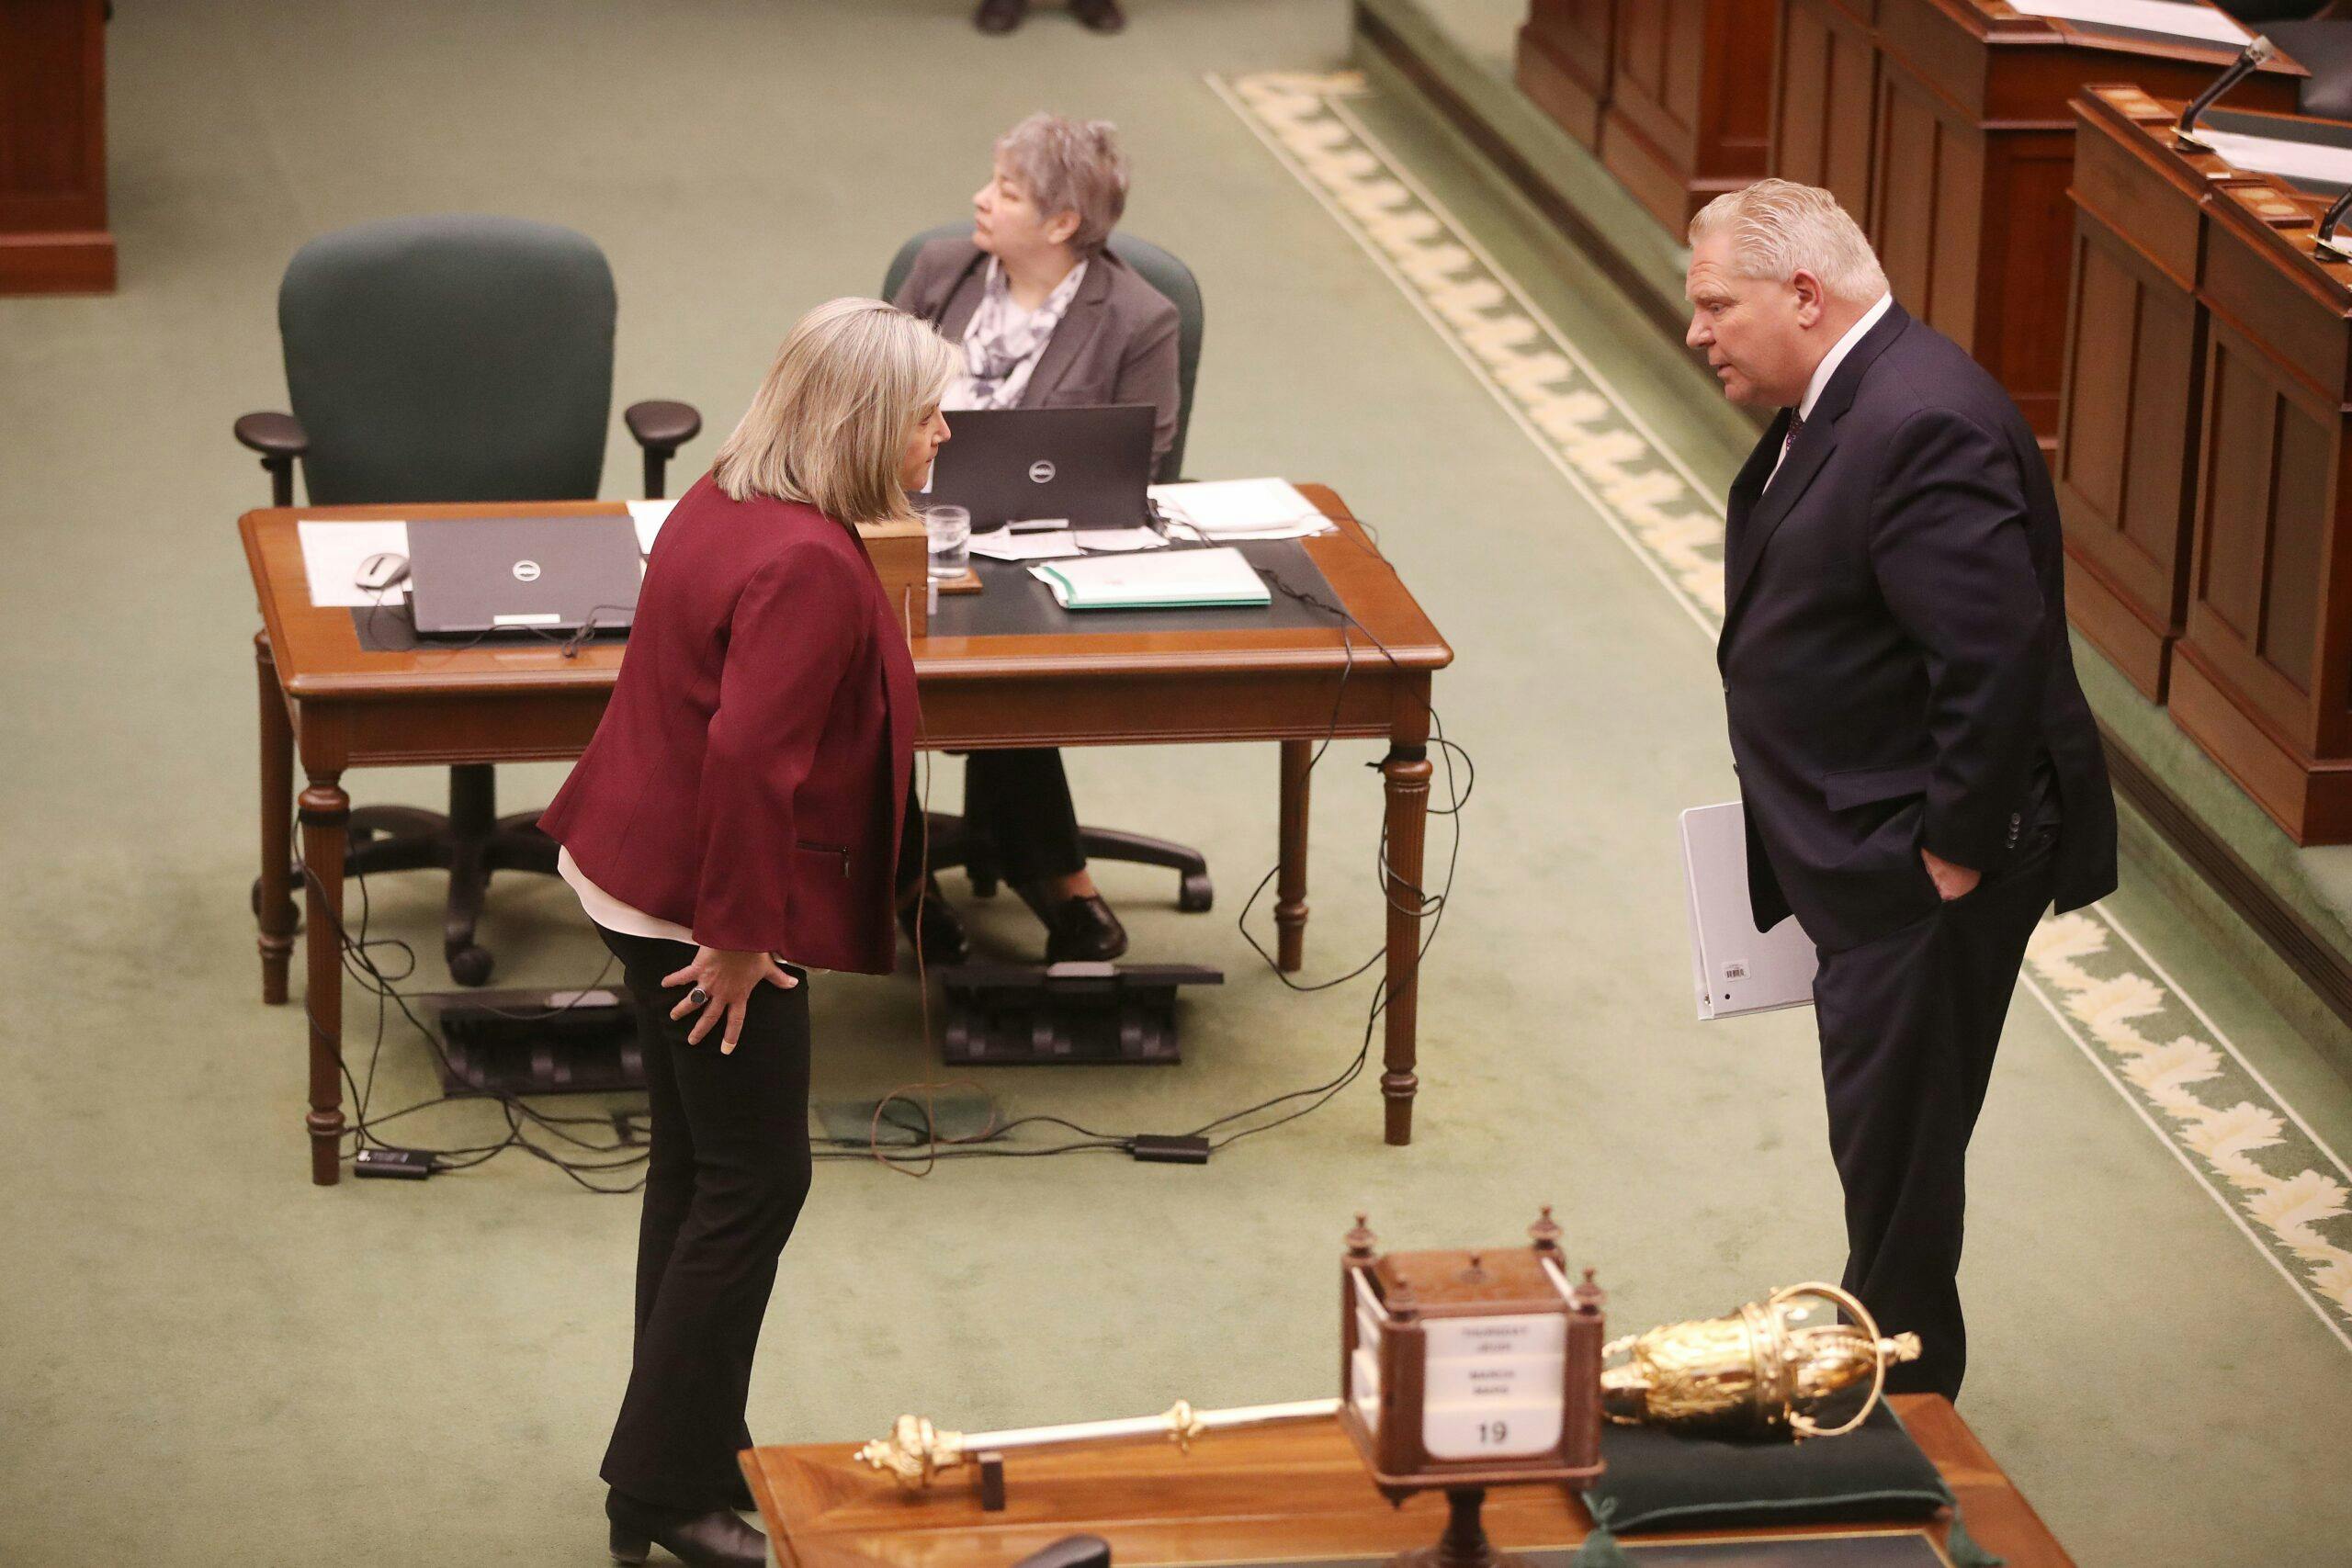 Believe it or not, the NDP platform and the Ford budget are not that different